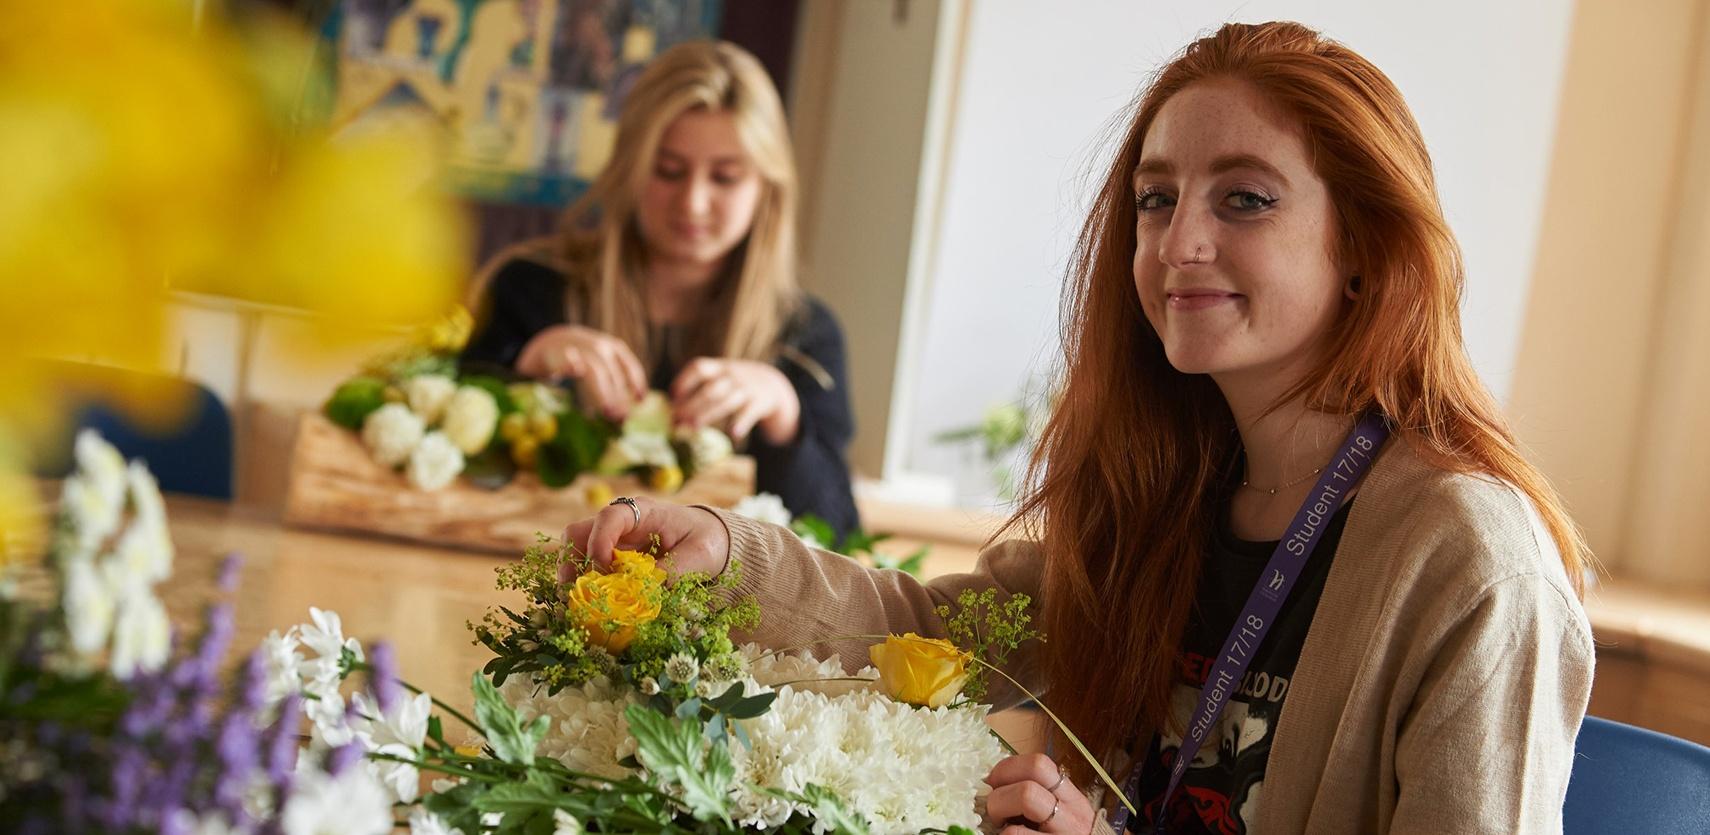 Floristry female student in a workshop